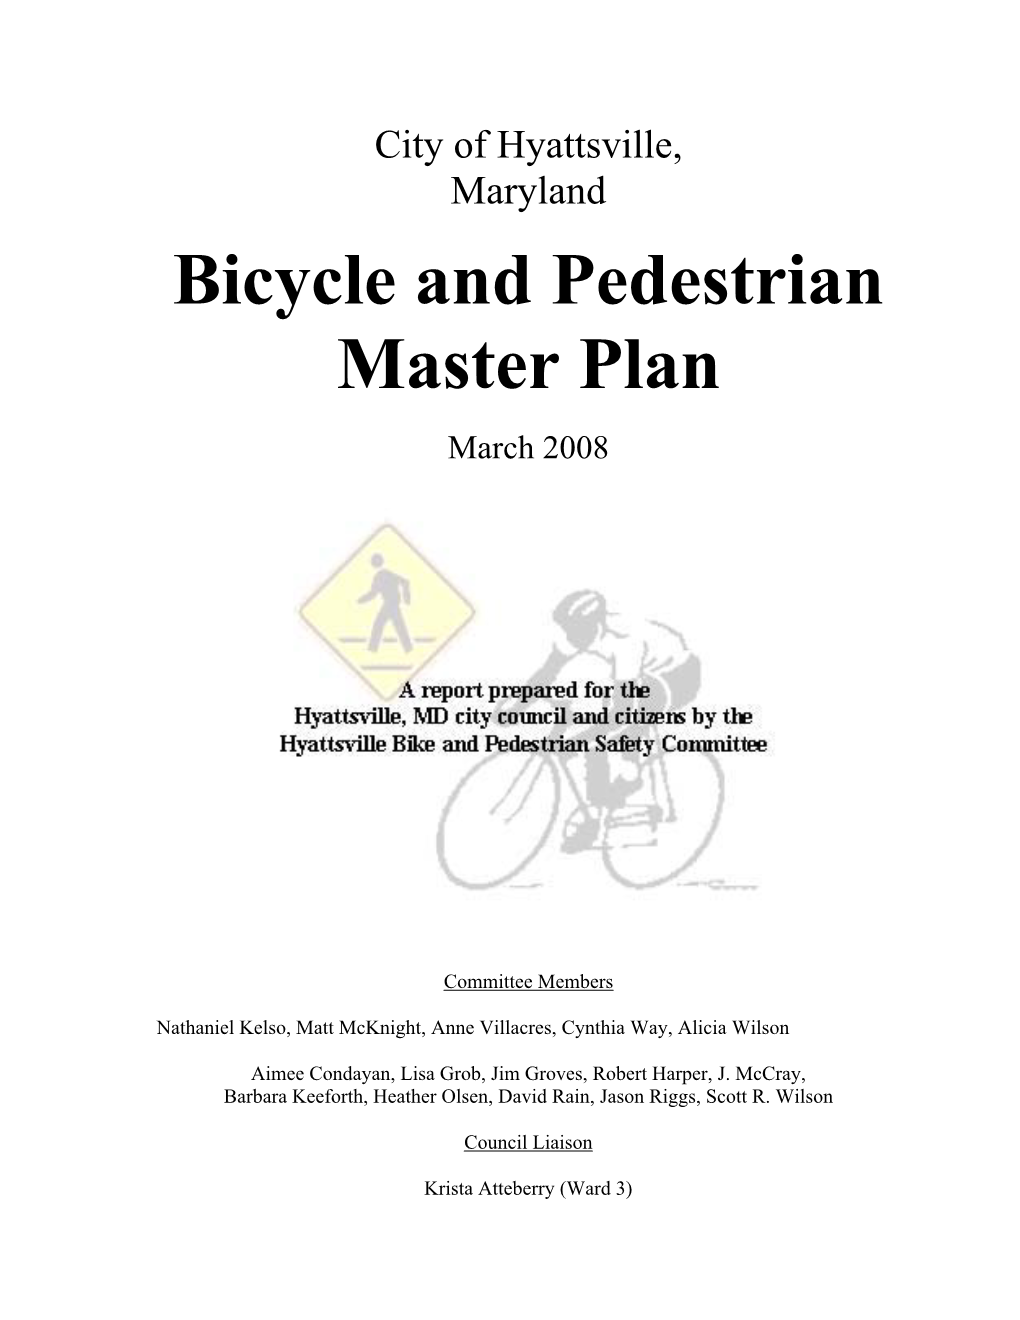 Bicycle and Pedestrian Master Plan March 2008